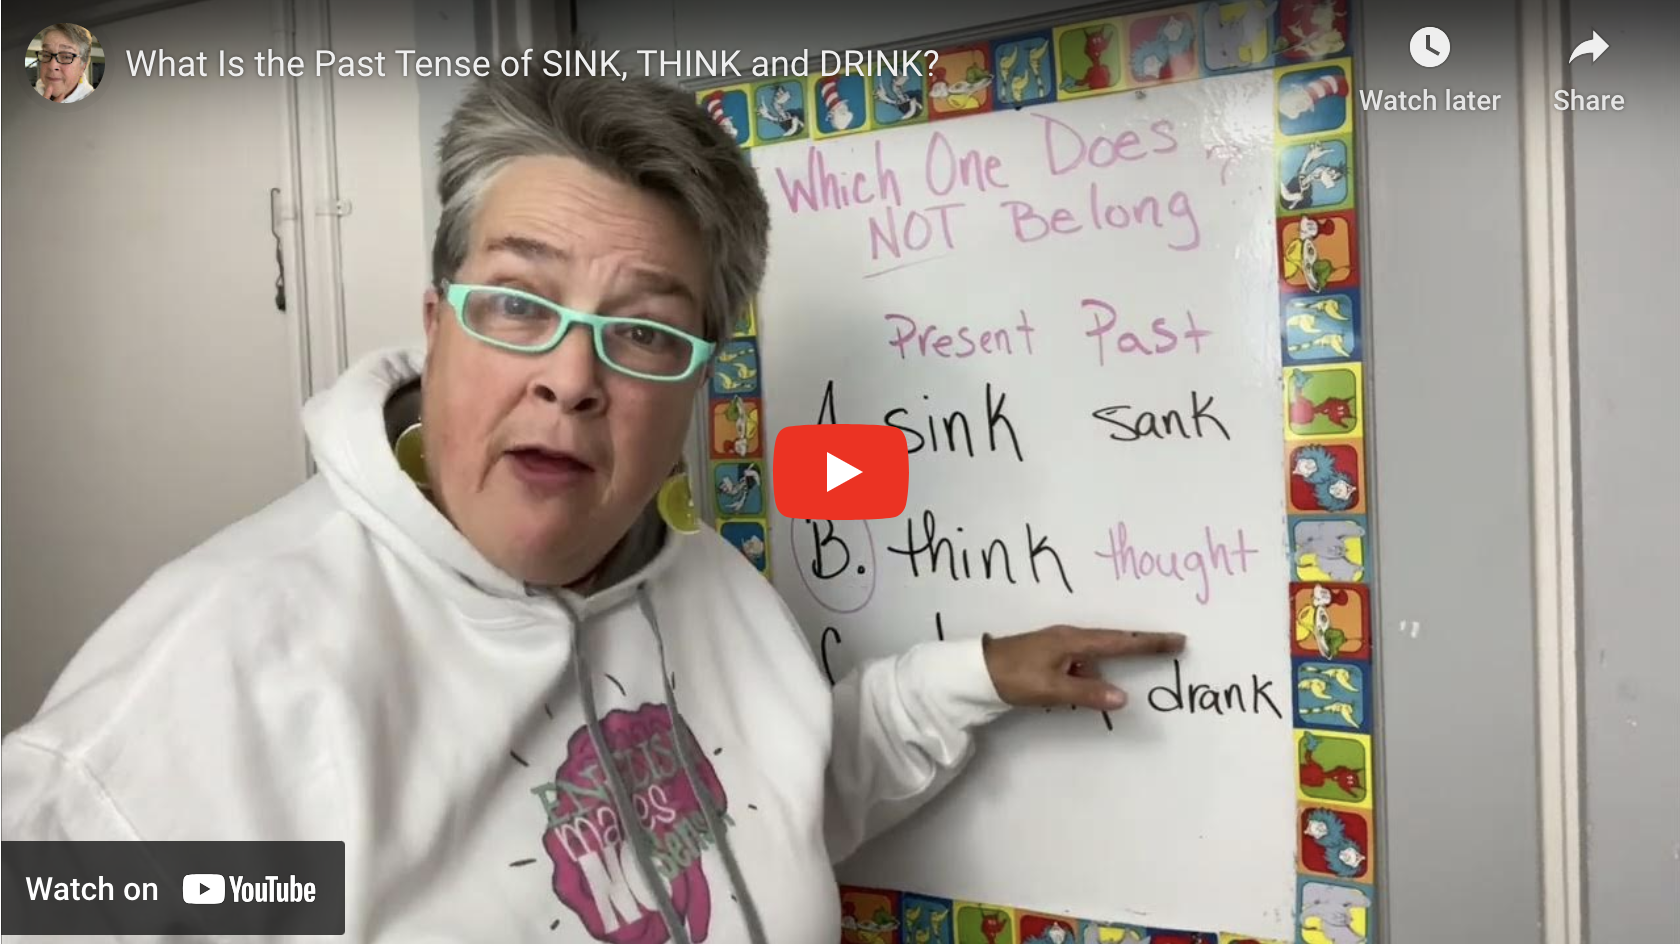 What is the past tense of sink, think and drink